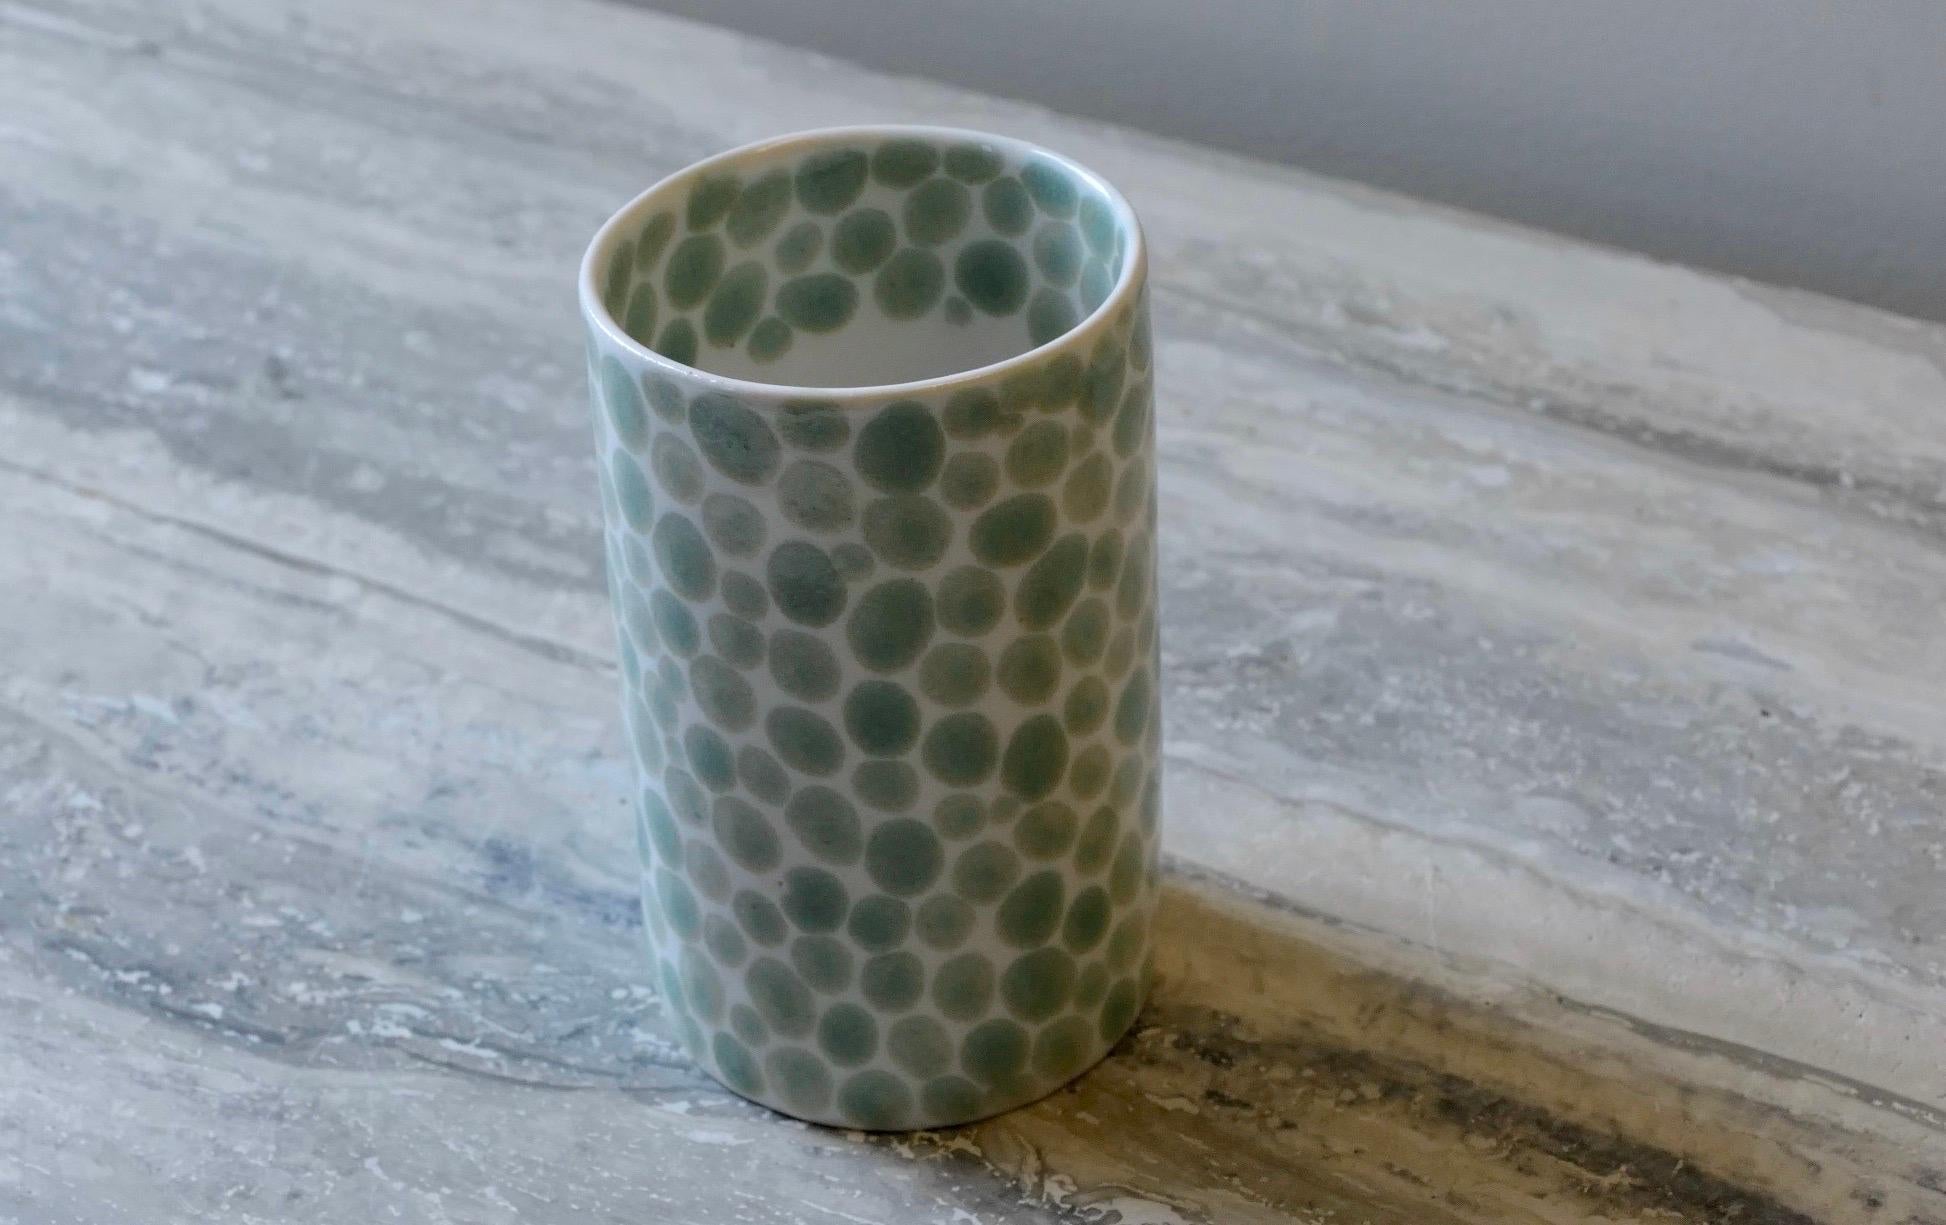 This porcelain cup is slip casted from liquid porcelain and individually painted in light green dots. The glaze is luminous and the cup walls are thin so light goes through. Perfect size for a morning latte or green tea. Tall and elegant shape.